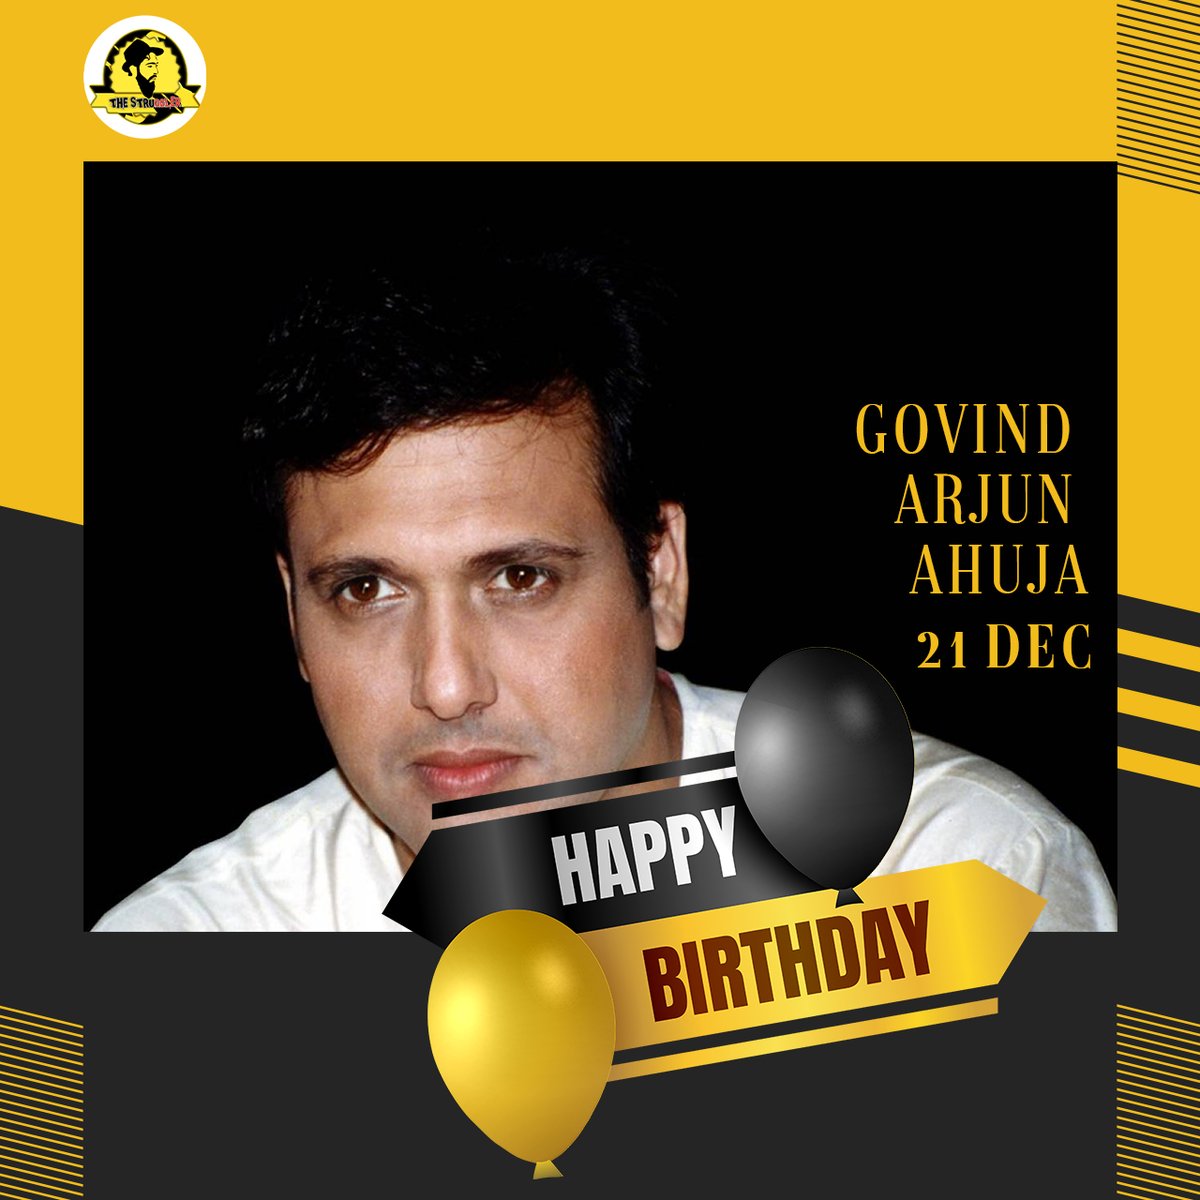 Govind Arun Ahuja is an Indian actor, comedian, dancer, and former politician, 

#thestruggler, #thestrugglerofficial #bollywoodnewshindi #actorbirthday  #filmindustry #govinda #govindabirthday  #bollywoodactorbirthday